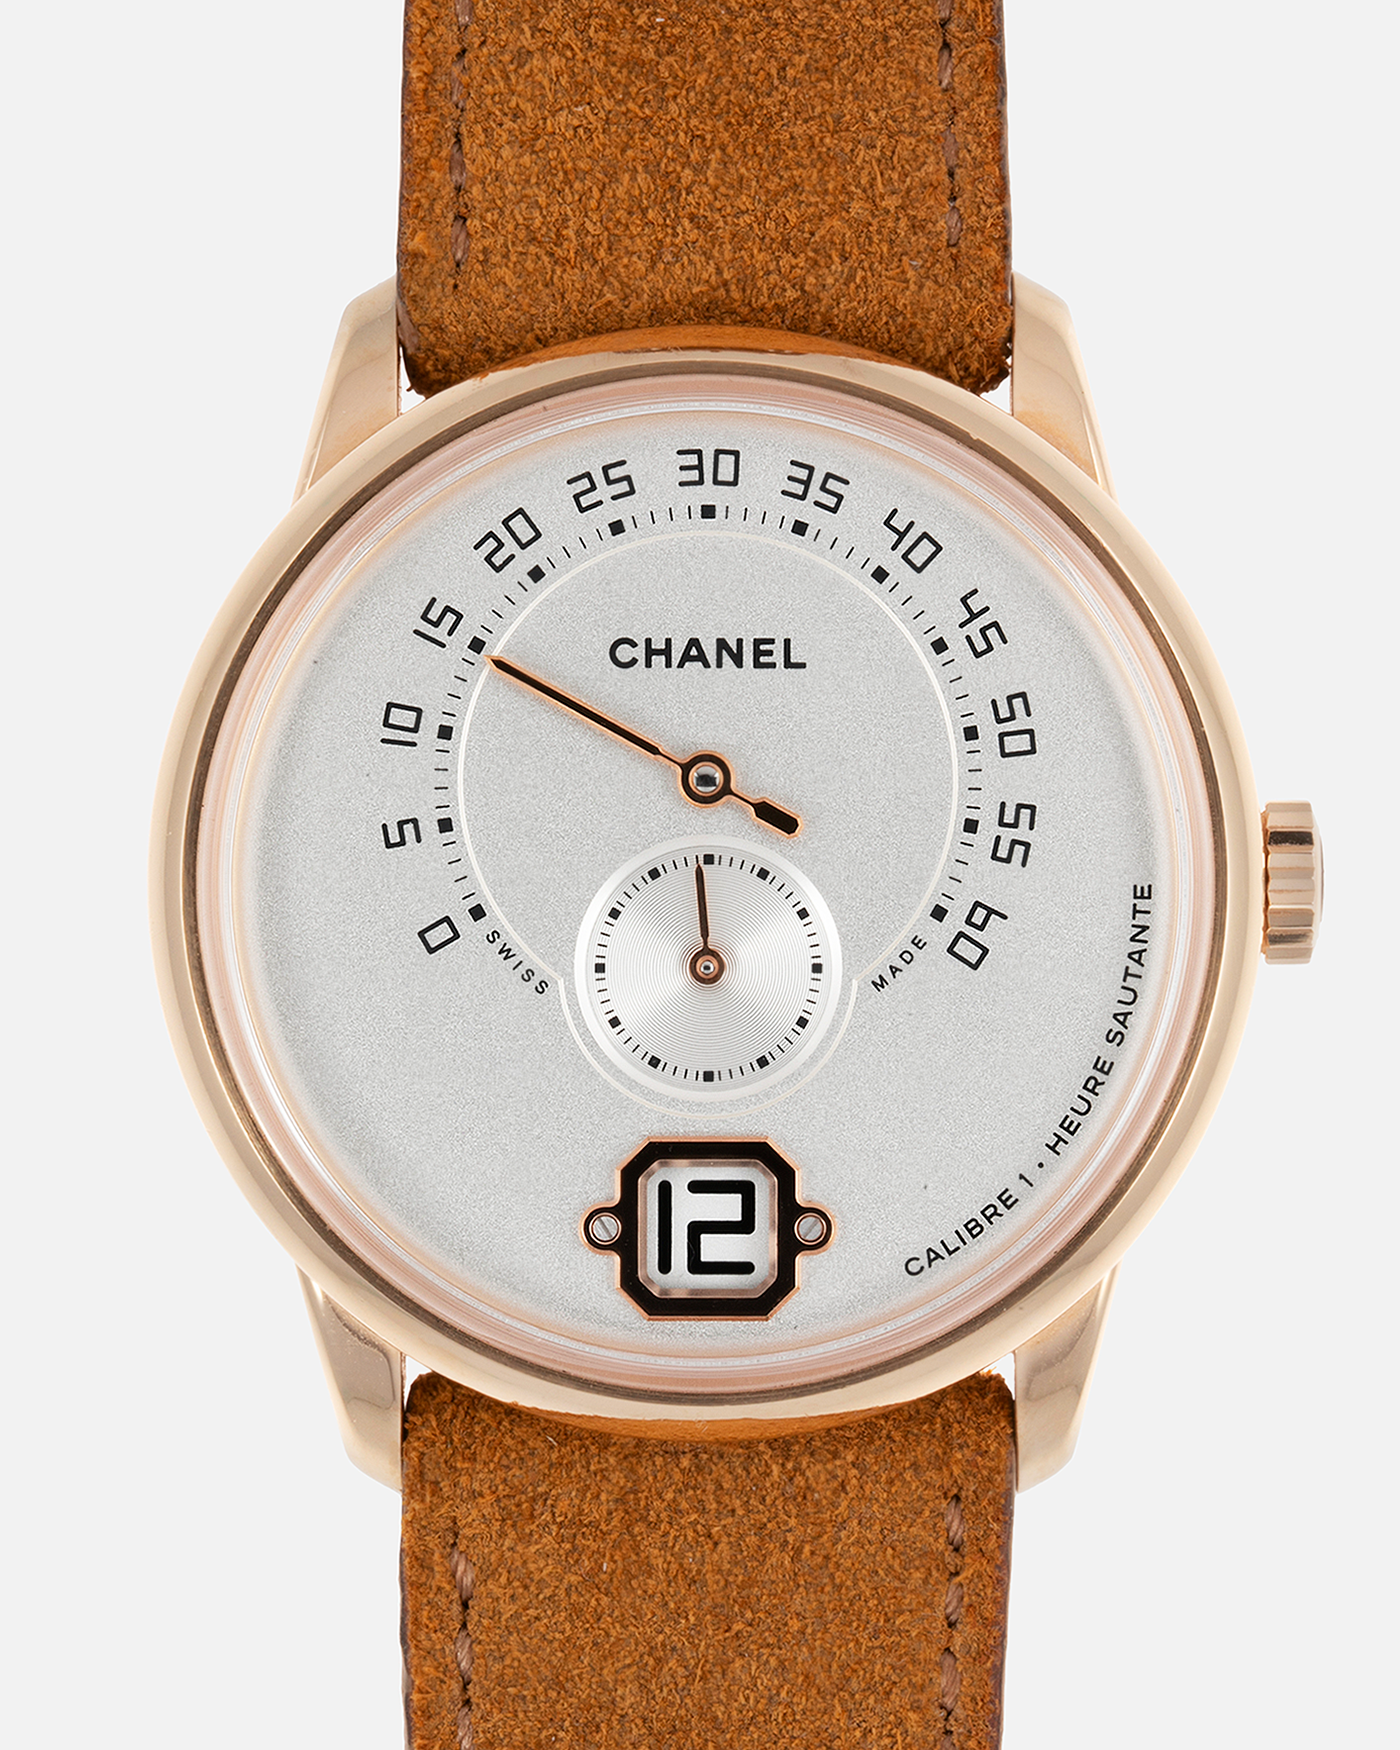 Brand: Chanel Year: 2016 Model: Monsieur De Chanel Jump Hour H6596 Material: 18-carat Beige Gold Movement: In-house Chanel Cal. 1, Manual-Winding  Case Diameter: 40mm Bracelet/Strap: Tanned Suede Strap from Rios 1931 with 18-carat Beige Gold Signed Deployant Clasp